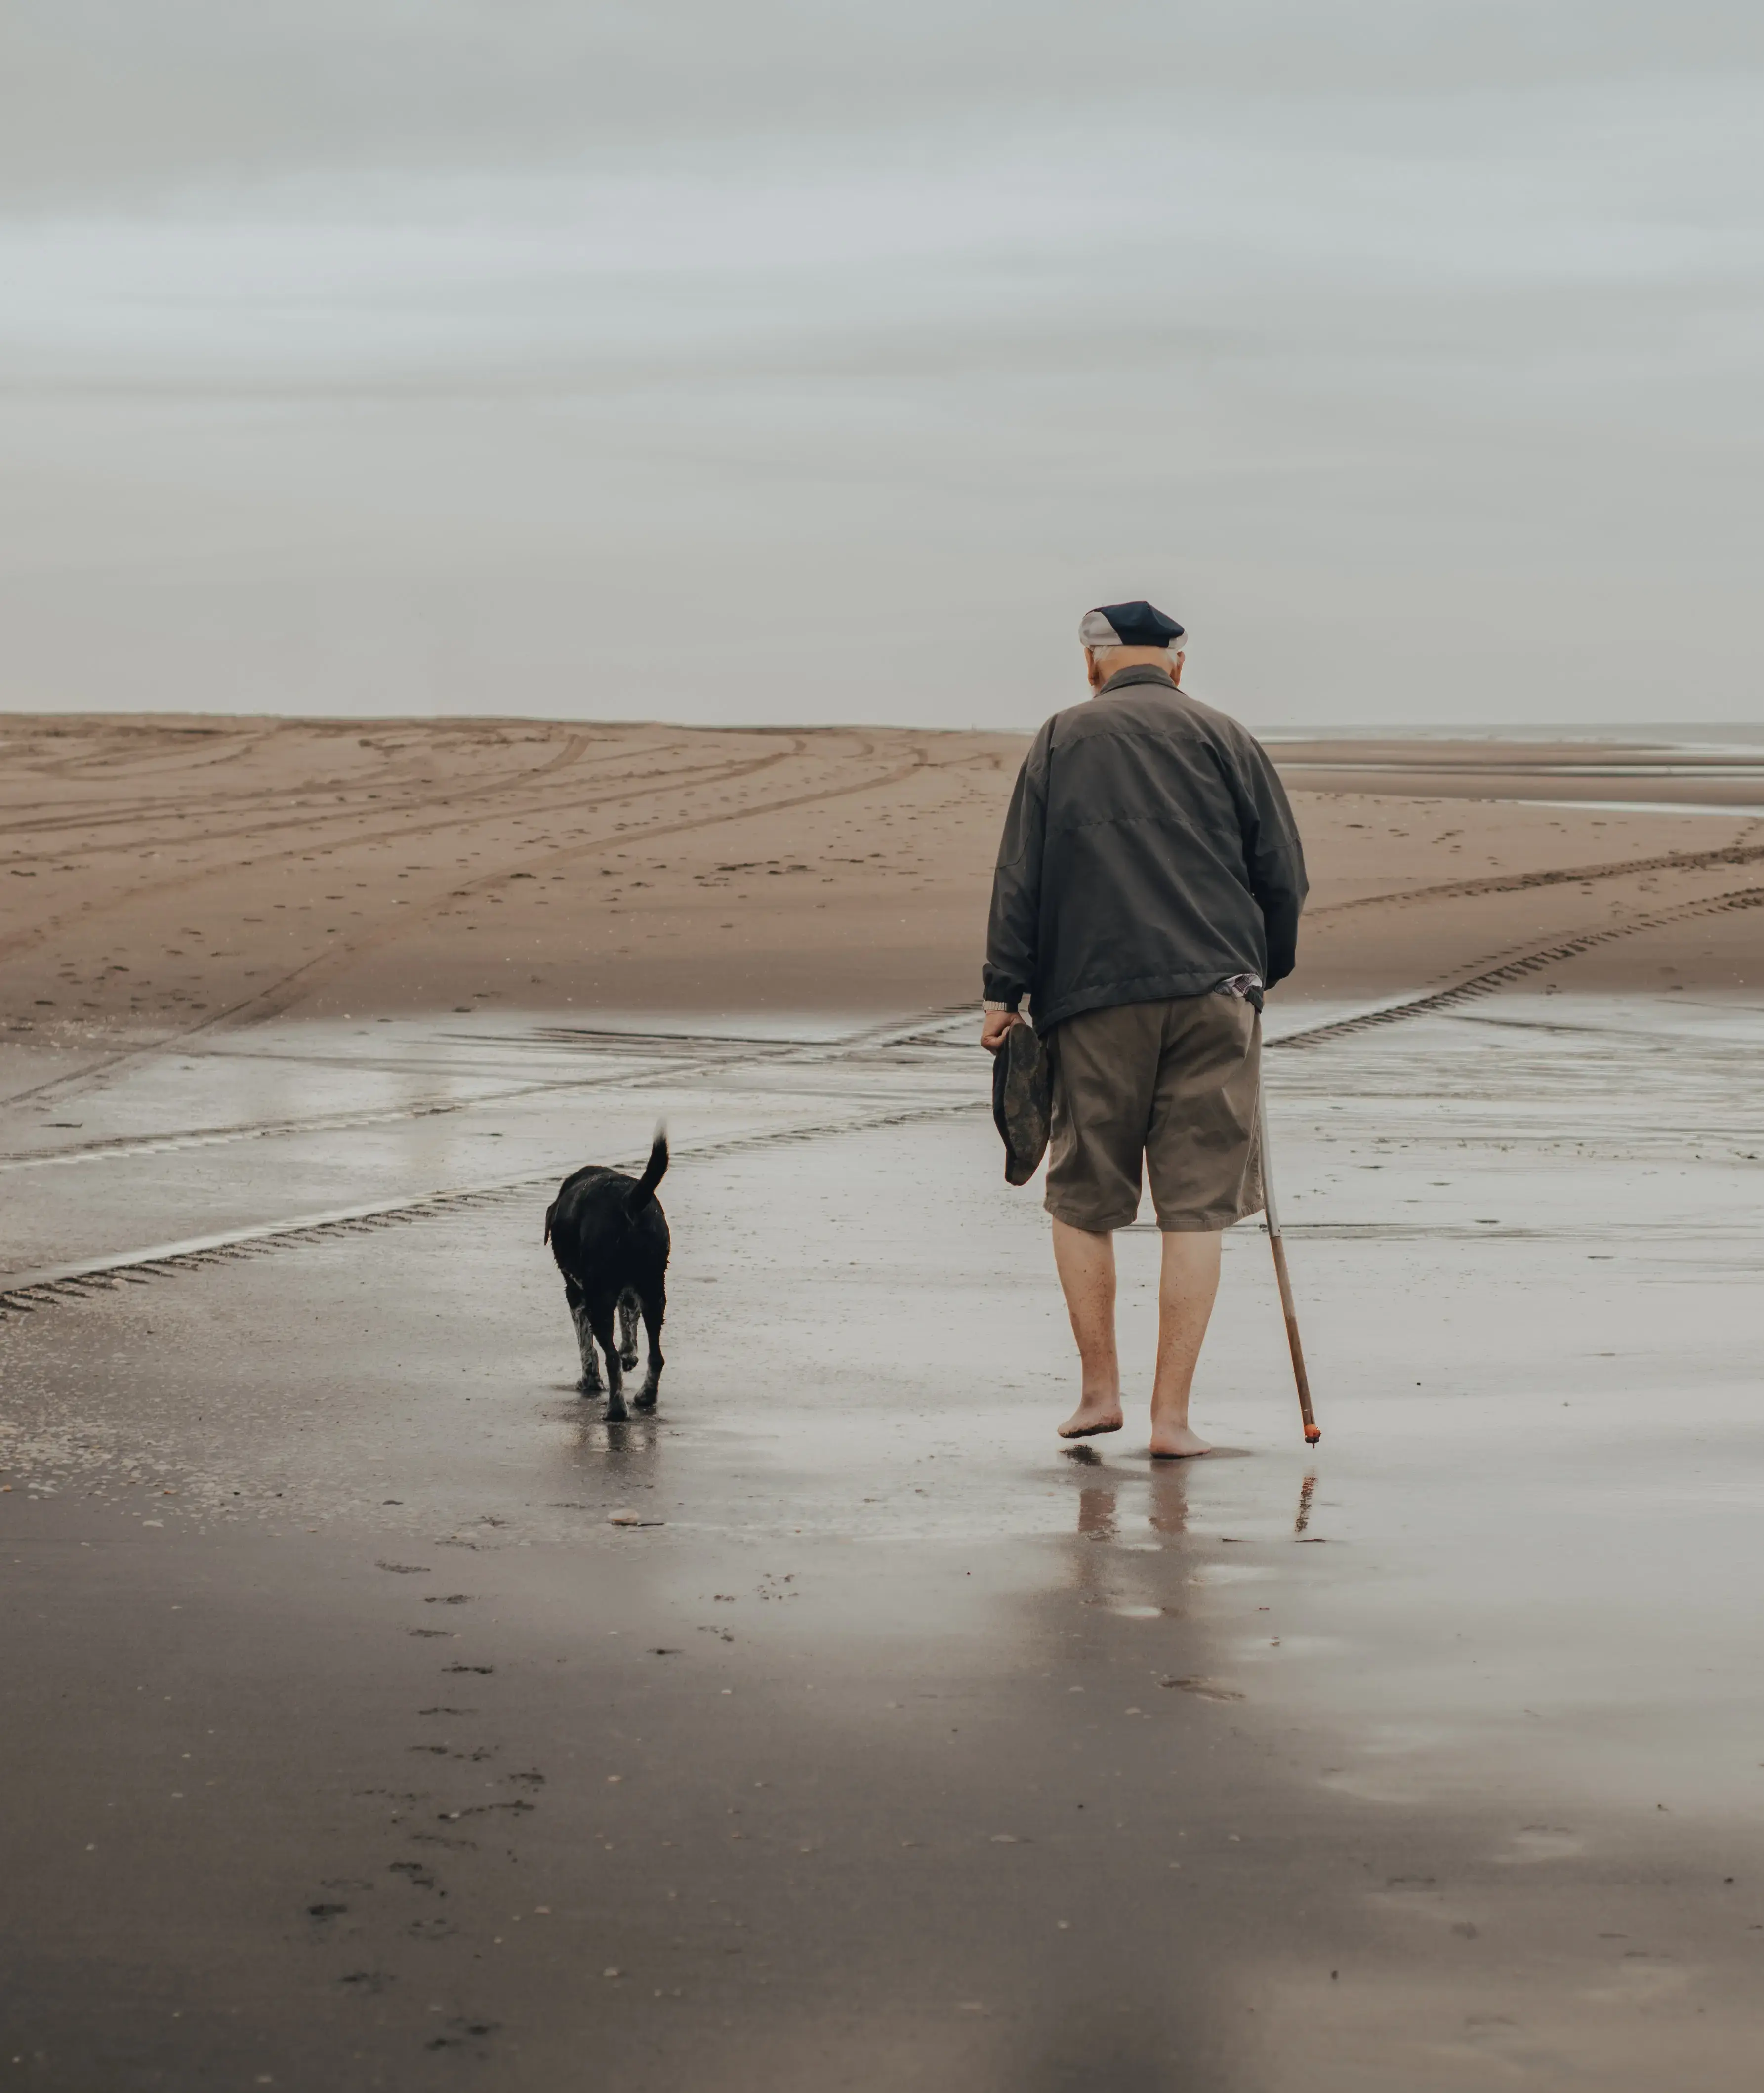 An Elderly Man Walking on Wet Shore with a Dog.